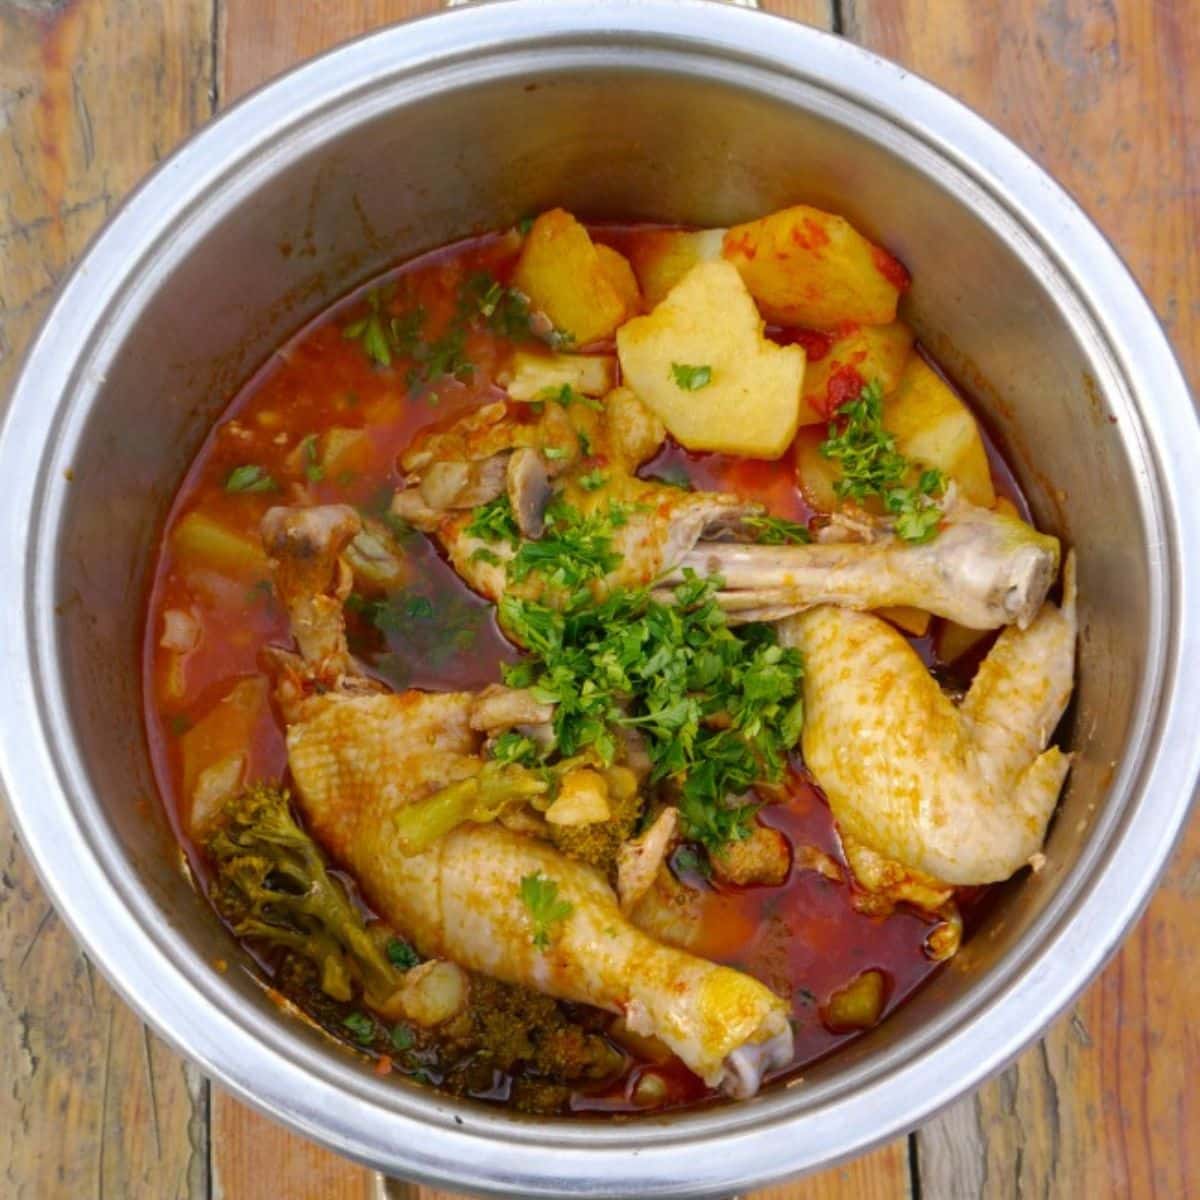 Chicken with vegetables in a pot on a table.